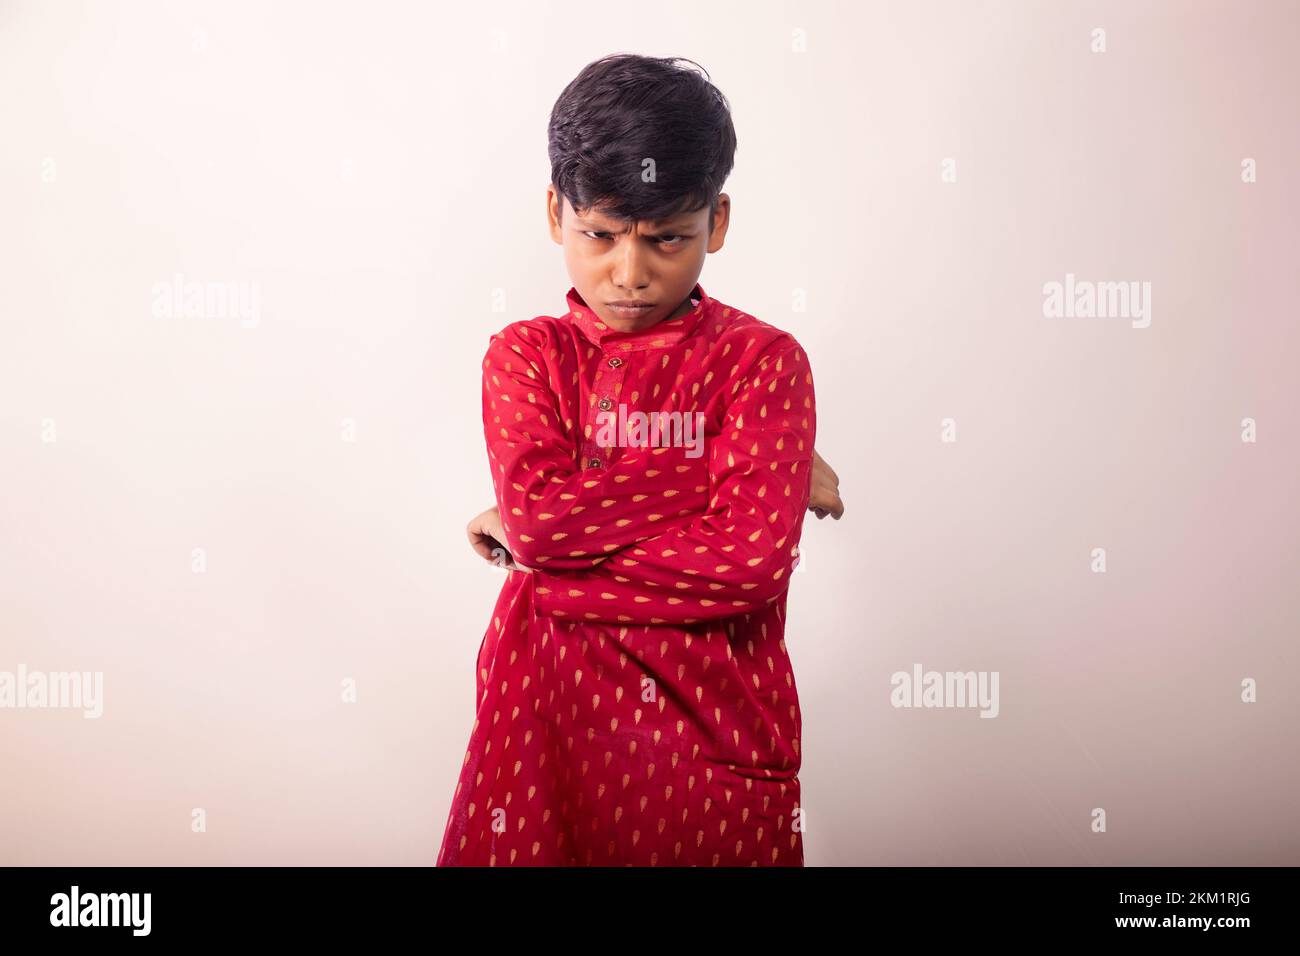 Boy wearing a traditional dress and Angry face Stock Photo